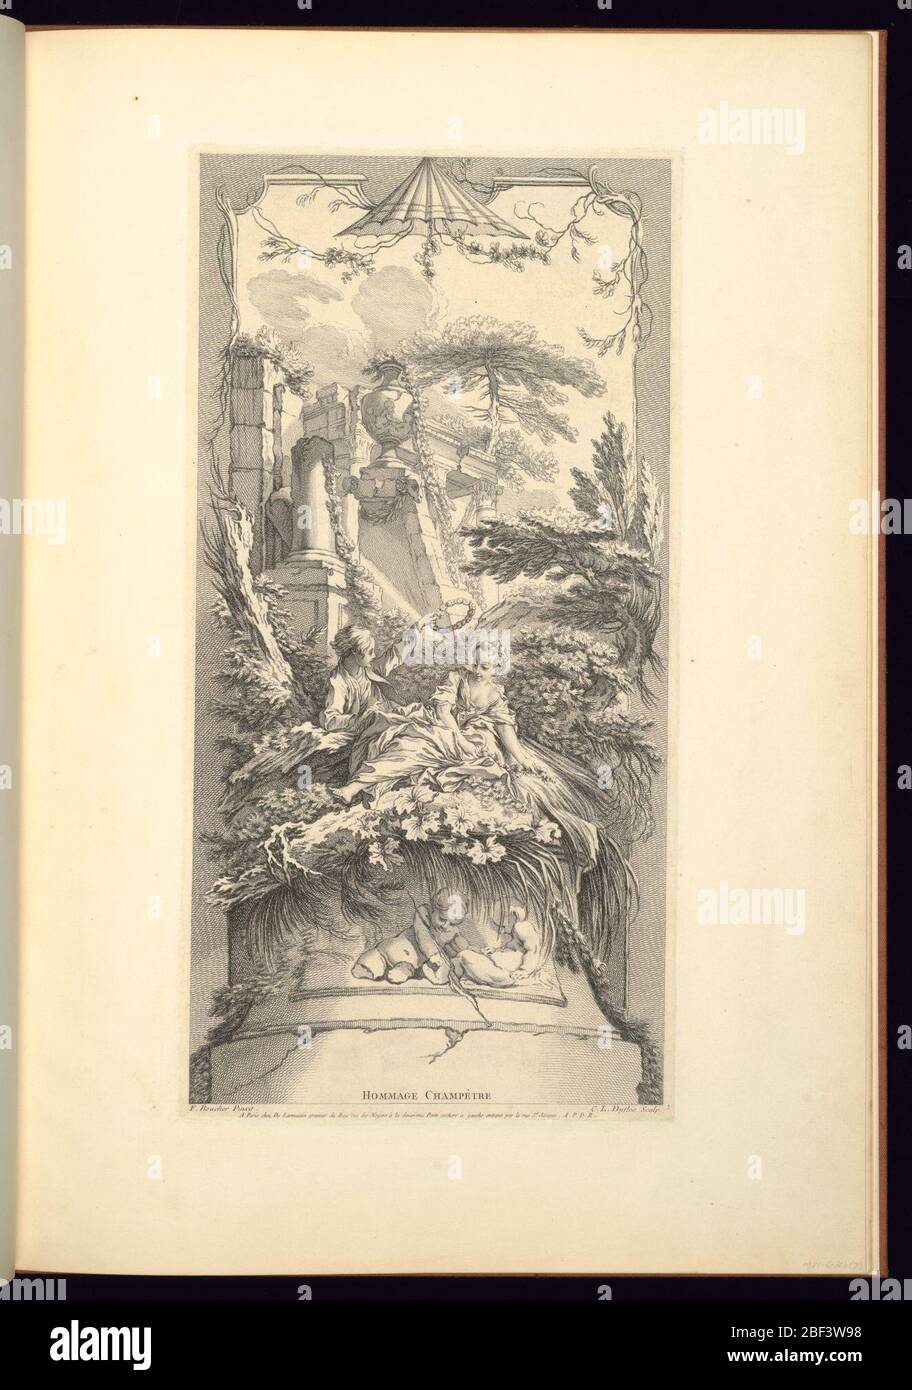 Hommage Champtre Pastorale from Nouveaux morceaux pour des Paravants New Designs for Screens. Vertical panel design with a pagoda motif, top center, an architectural ruin showing the capital of a column, an urn, a broken column, interspersed with garlands and leaves. Stock Photo